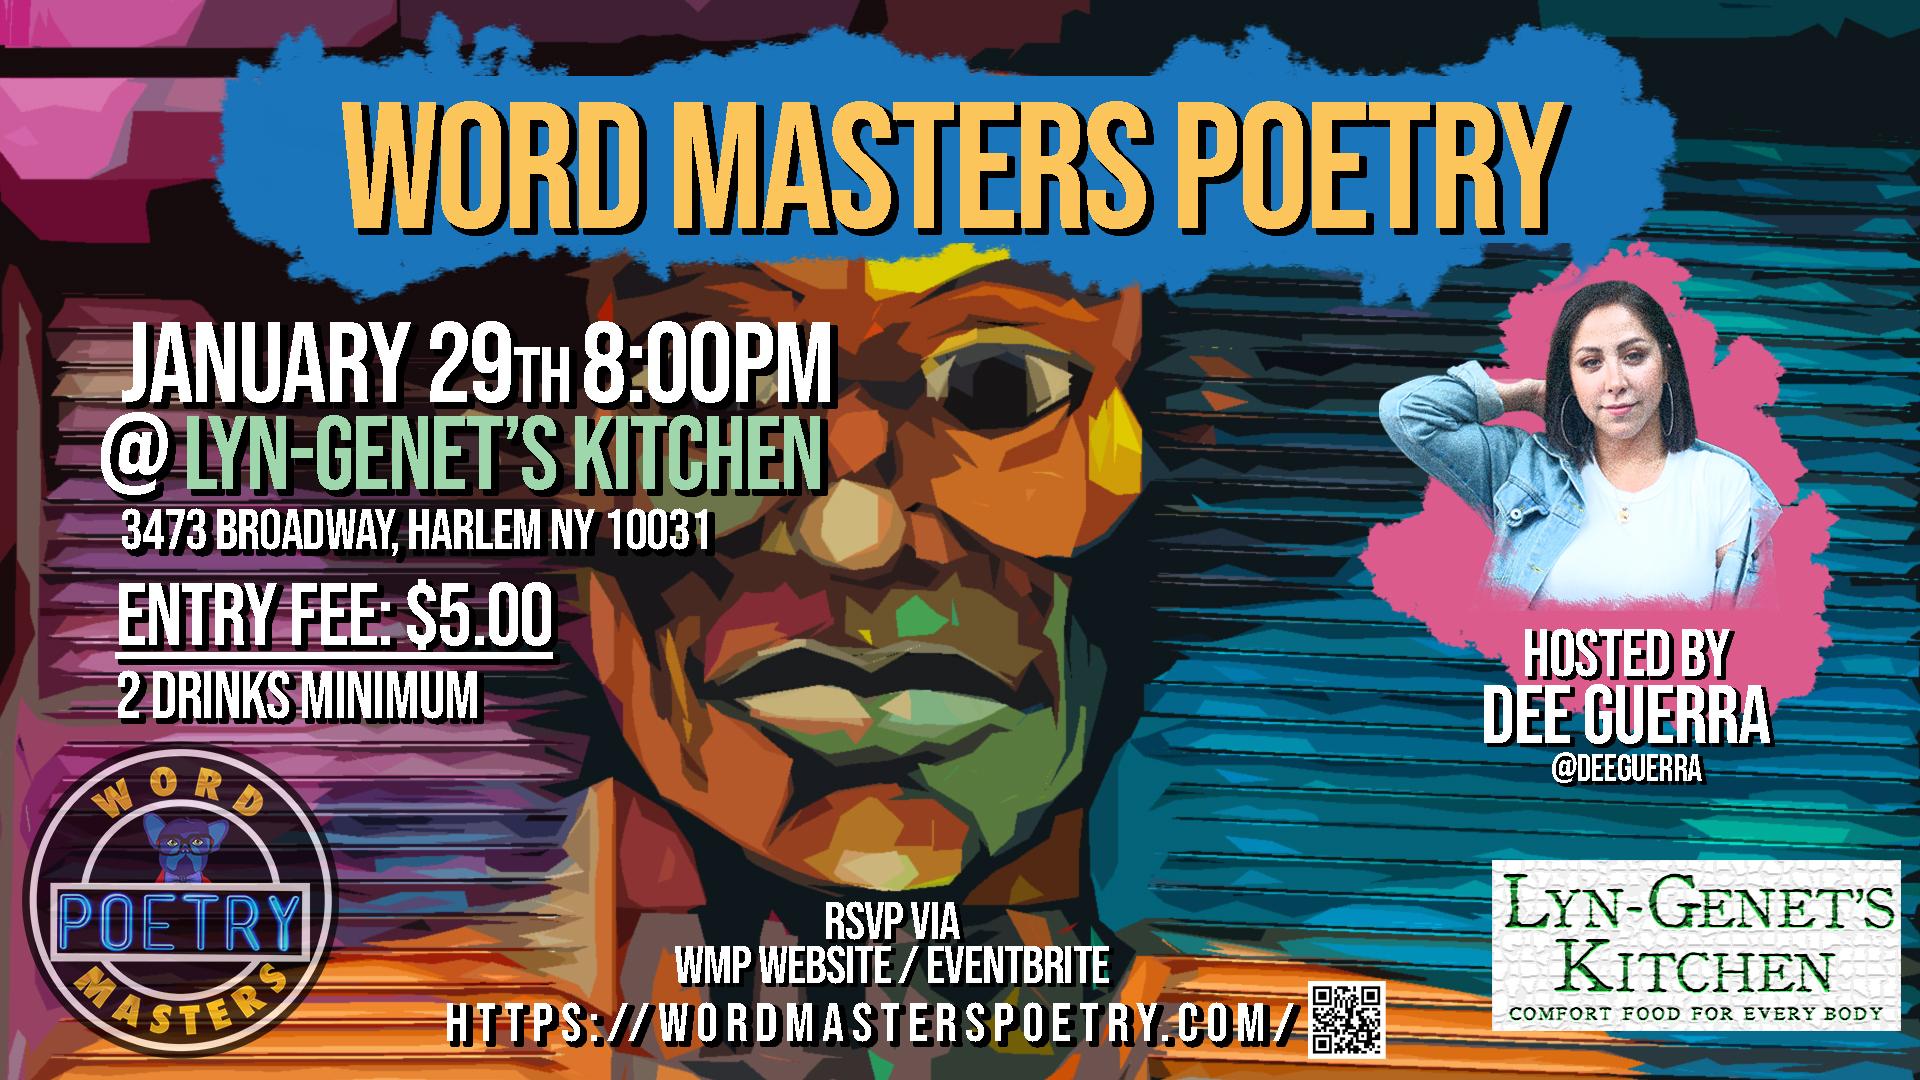 Word Masters Poetry January Showcase at Lyn-Genet's Kitchen in Harlem